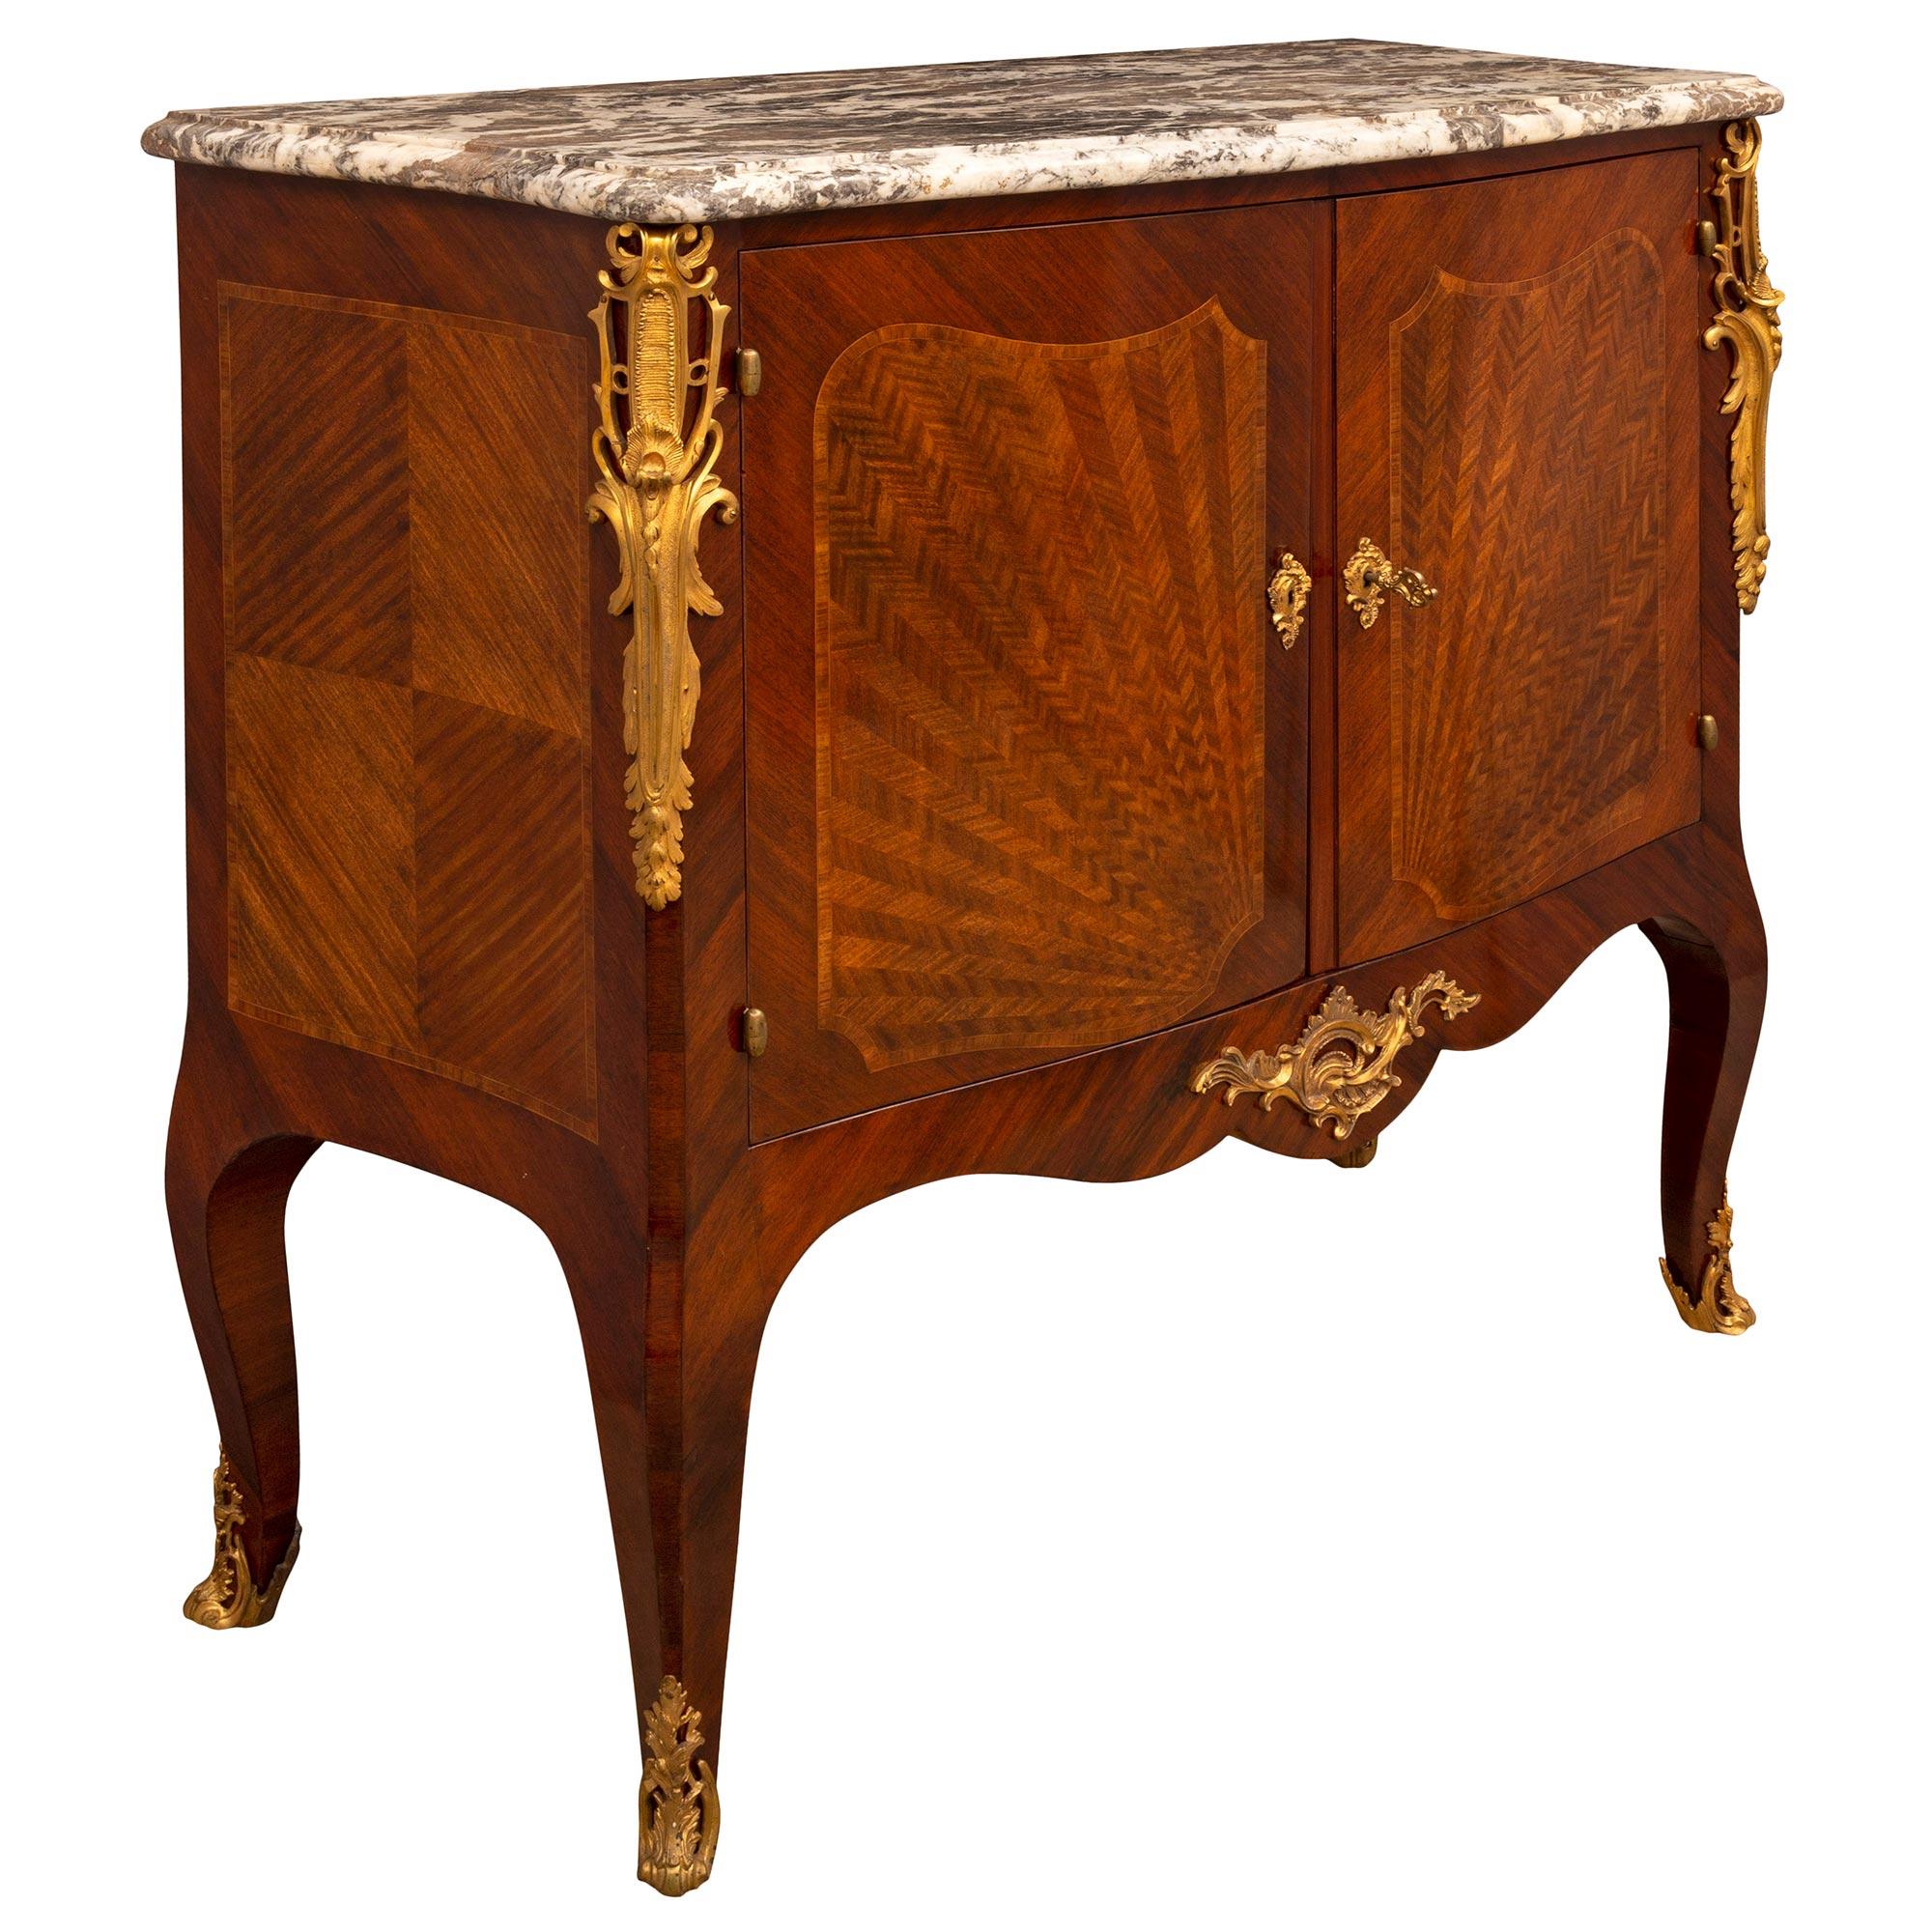 French 19th Century Louis XV St. Kingwood, Tulipwood, Ormolu and Marble Cabinet In Good Condition For Sale In West Palm Beach, FL